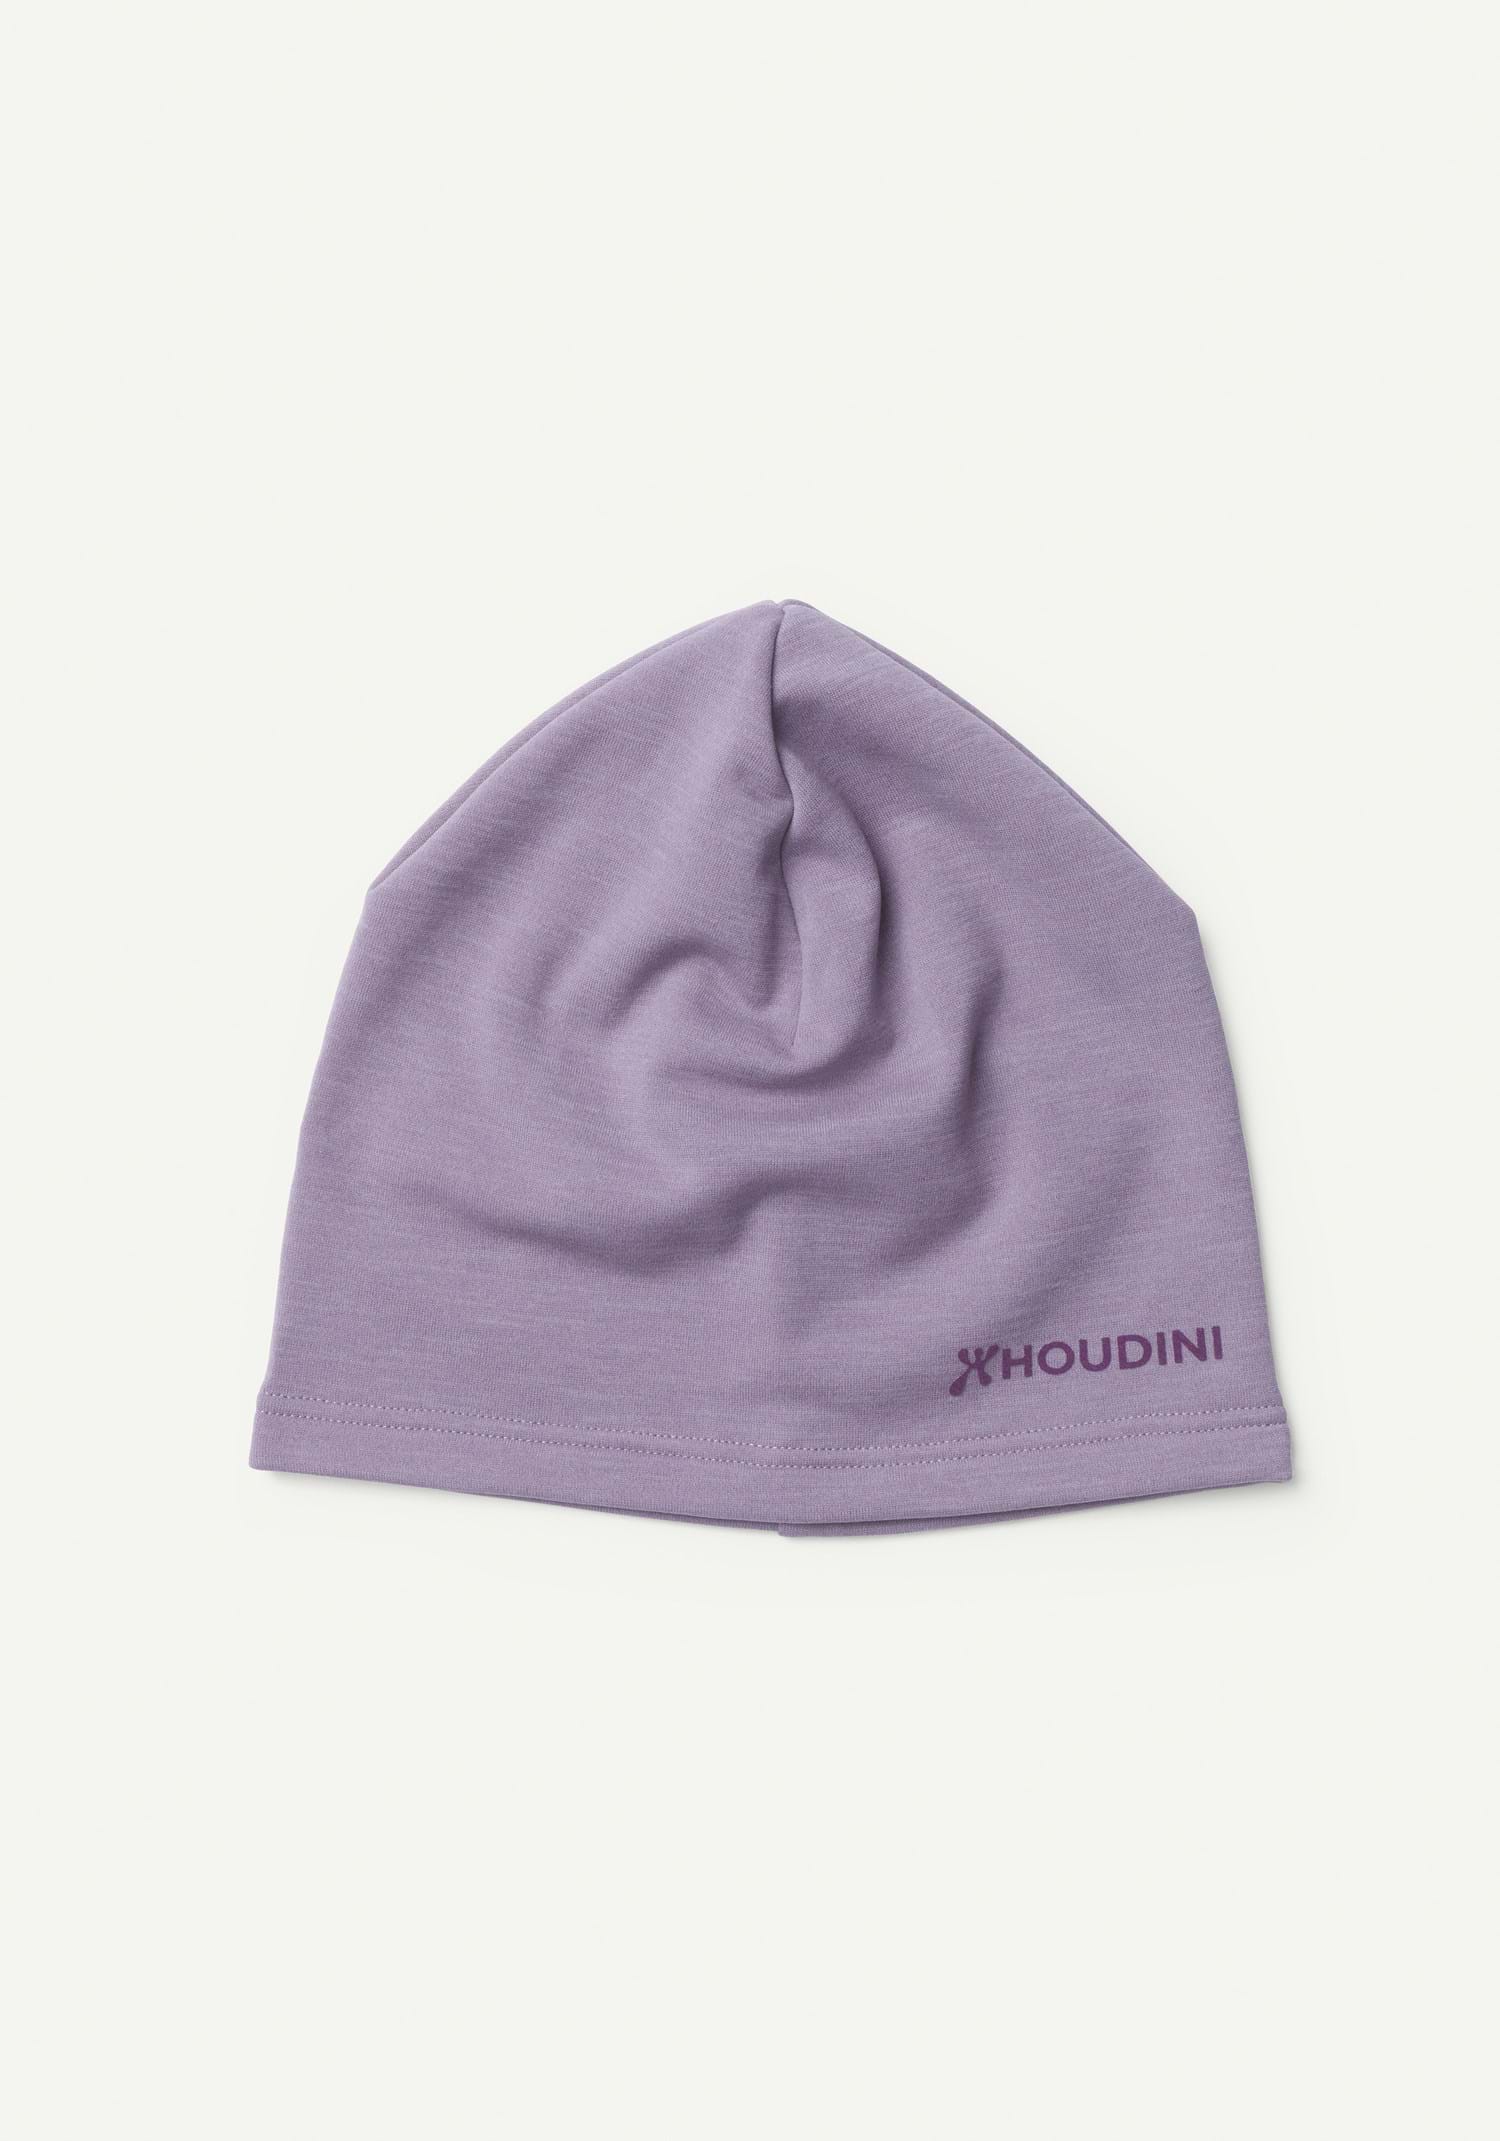 Houdini Outright Hat, Lavender Woods, S